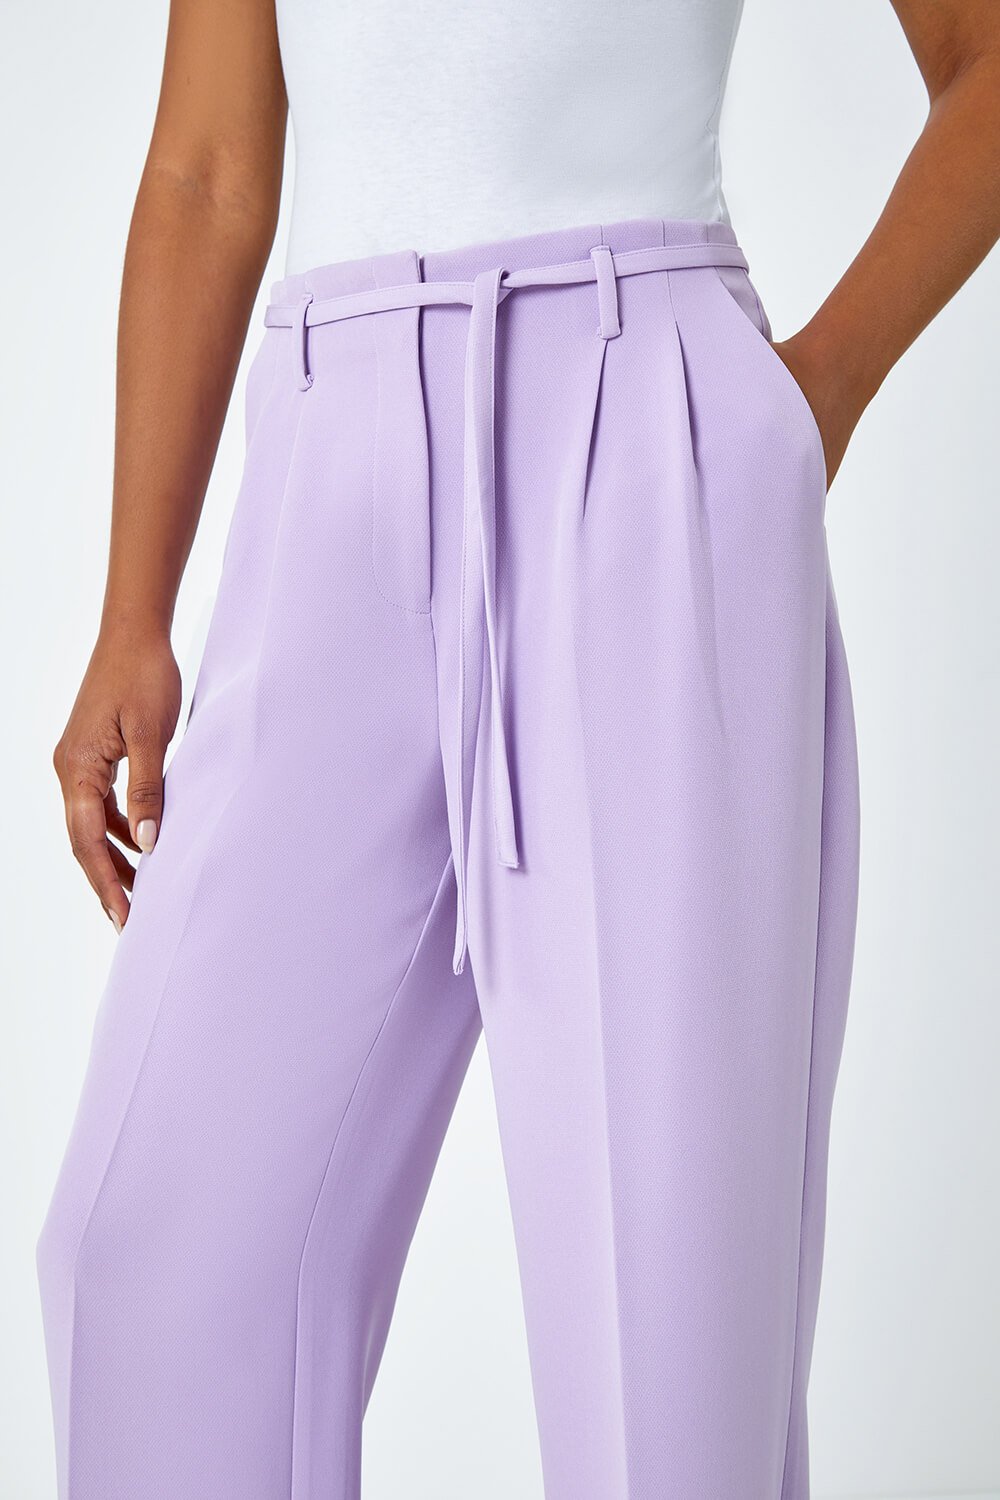 Lilac Crepe Stretch Straight Leg Trousers, Image 5 of 6